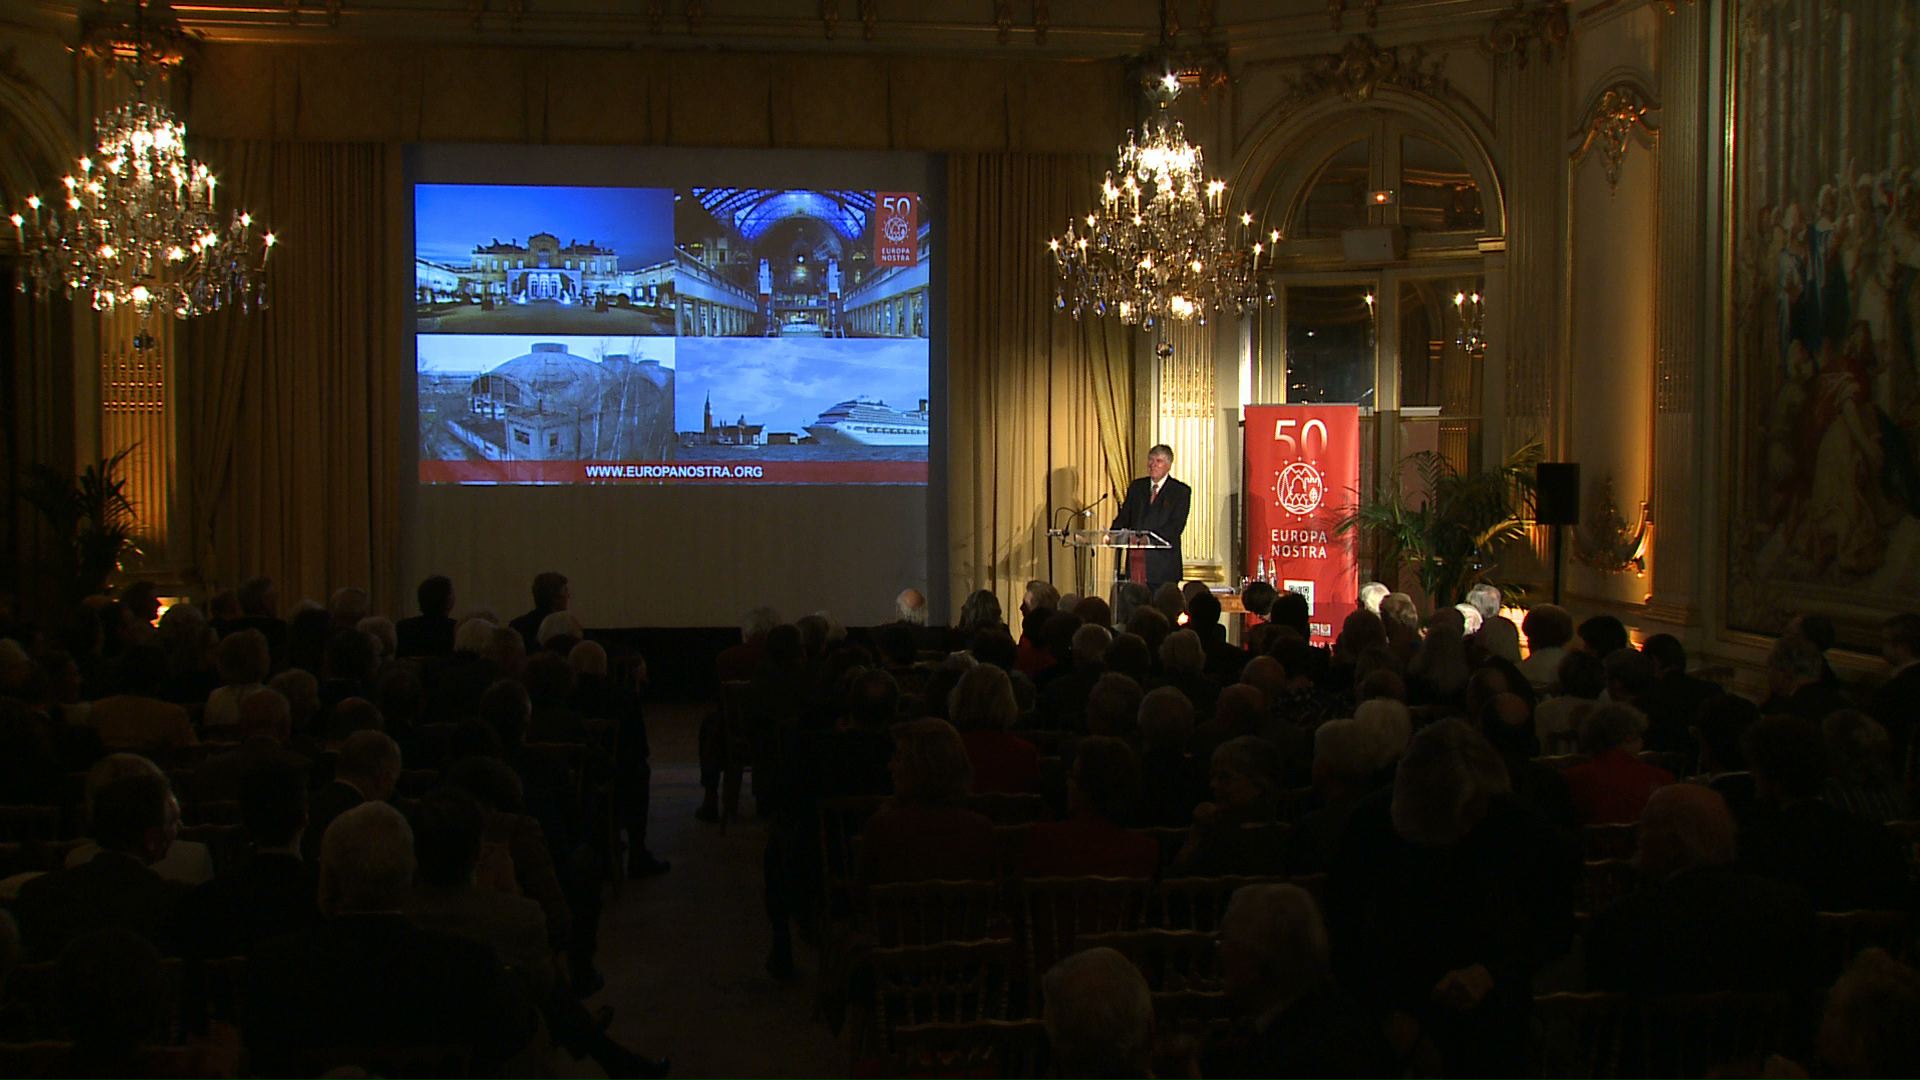 The event was held at the Cercle de l’Union Interalliée and attended by some 300 French and international personalities from the worlds of culture, politics and business.